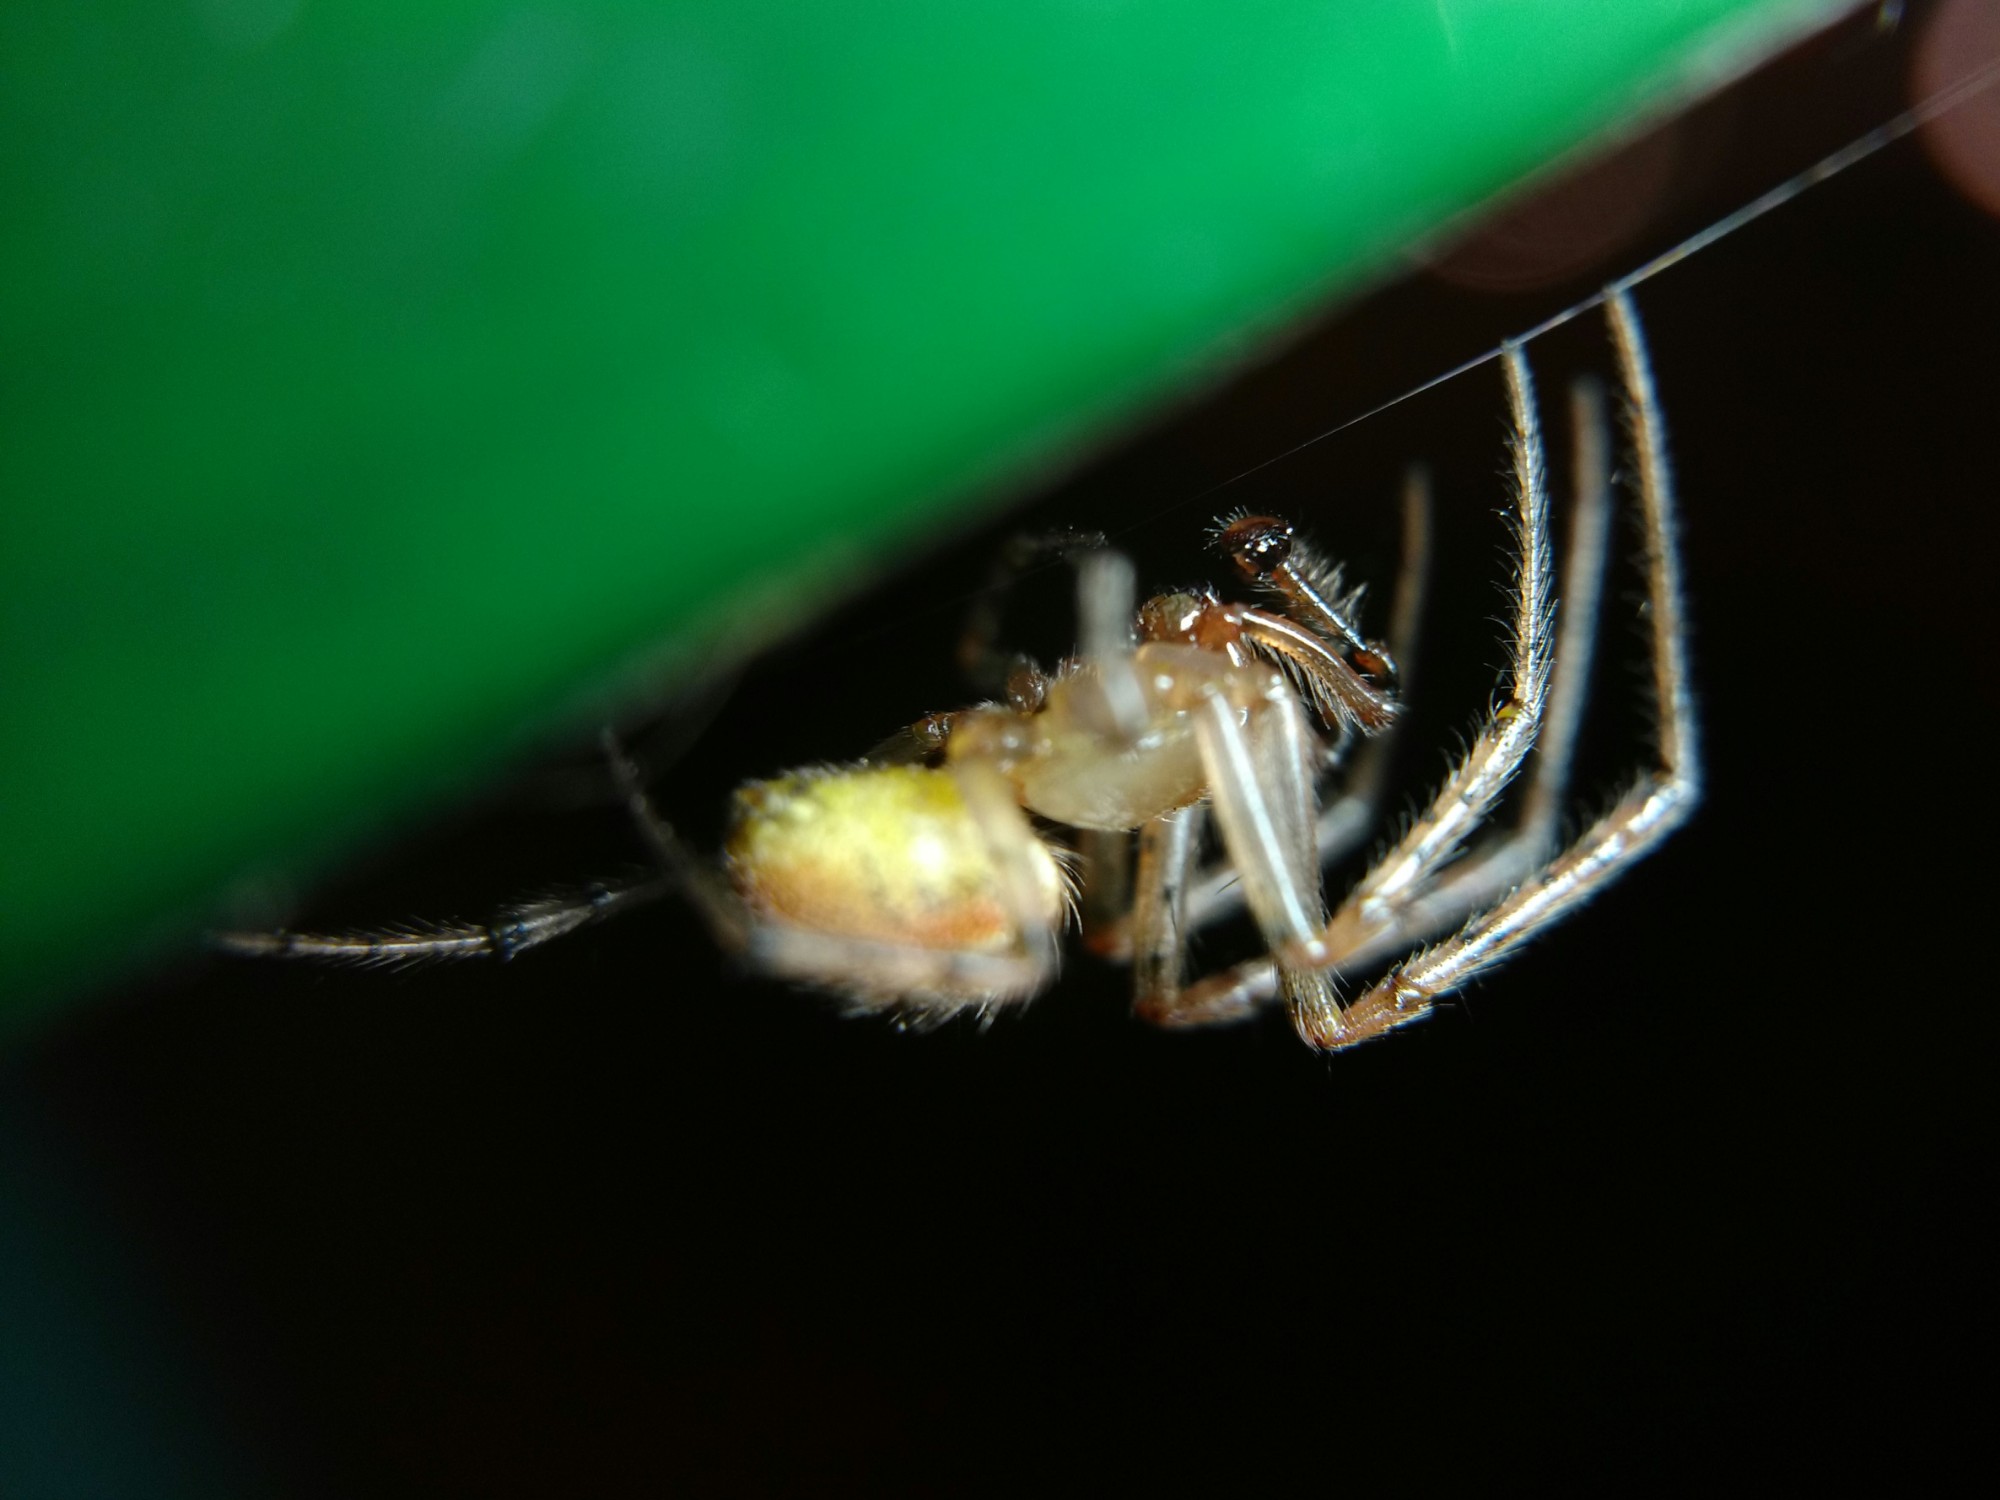 Male missing-sector orbweaver, leggier with smaller abdomen and long pedipalps. From this view you can see the flush of red on the side of the abdomen, not visible in the photo of the female.